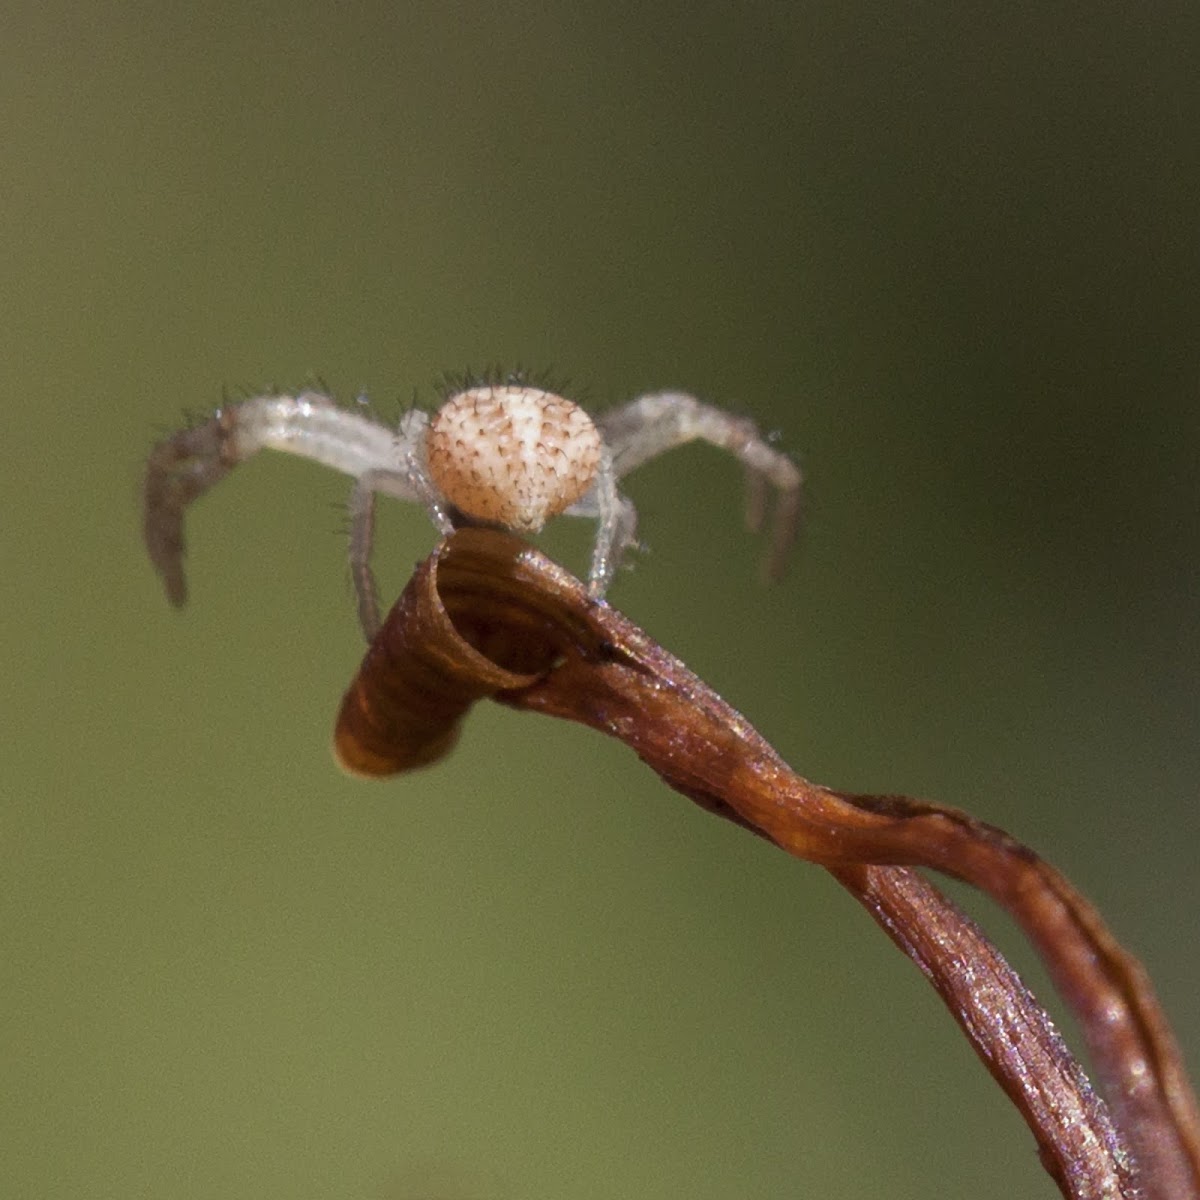 flower crab spider (really tiny)